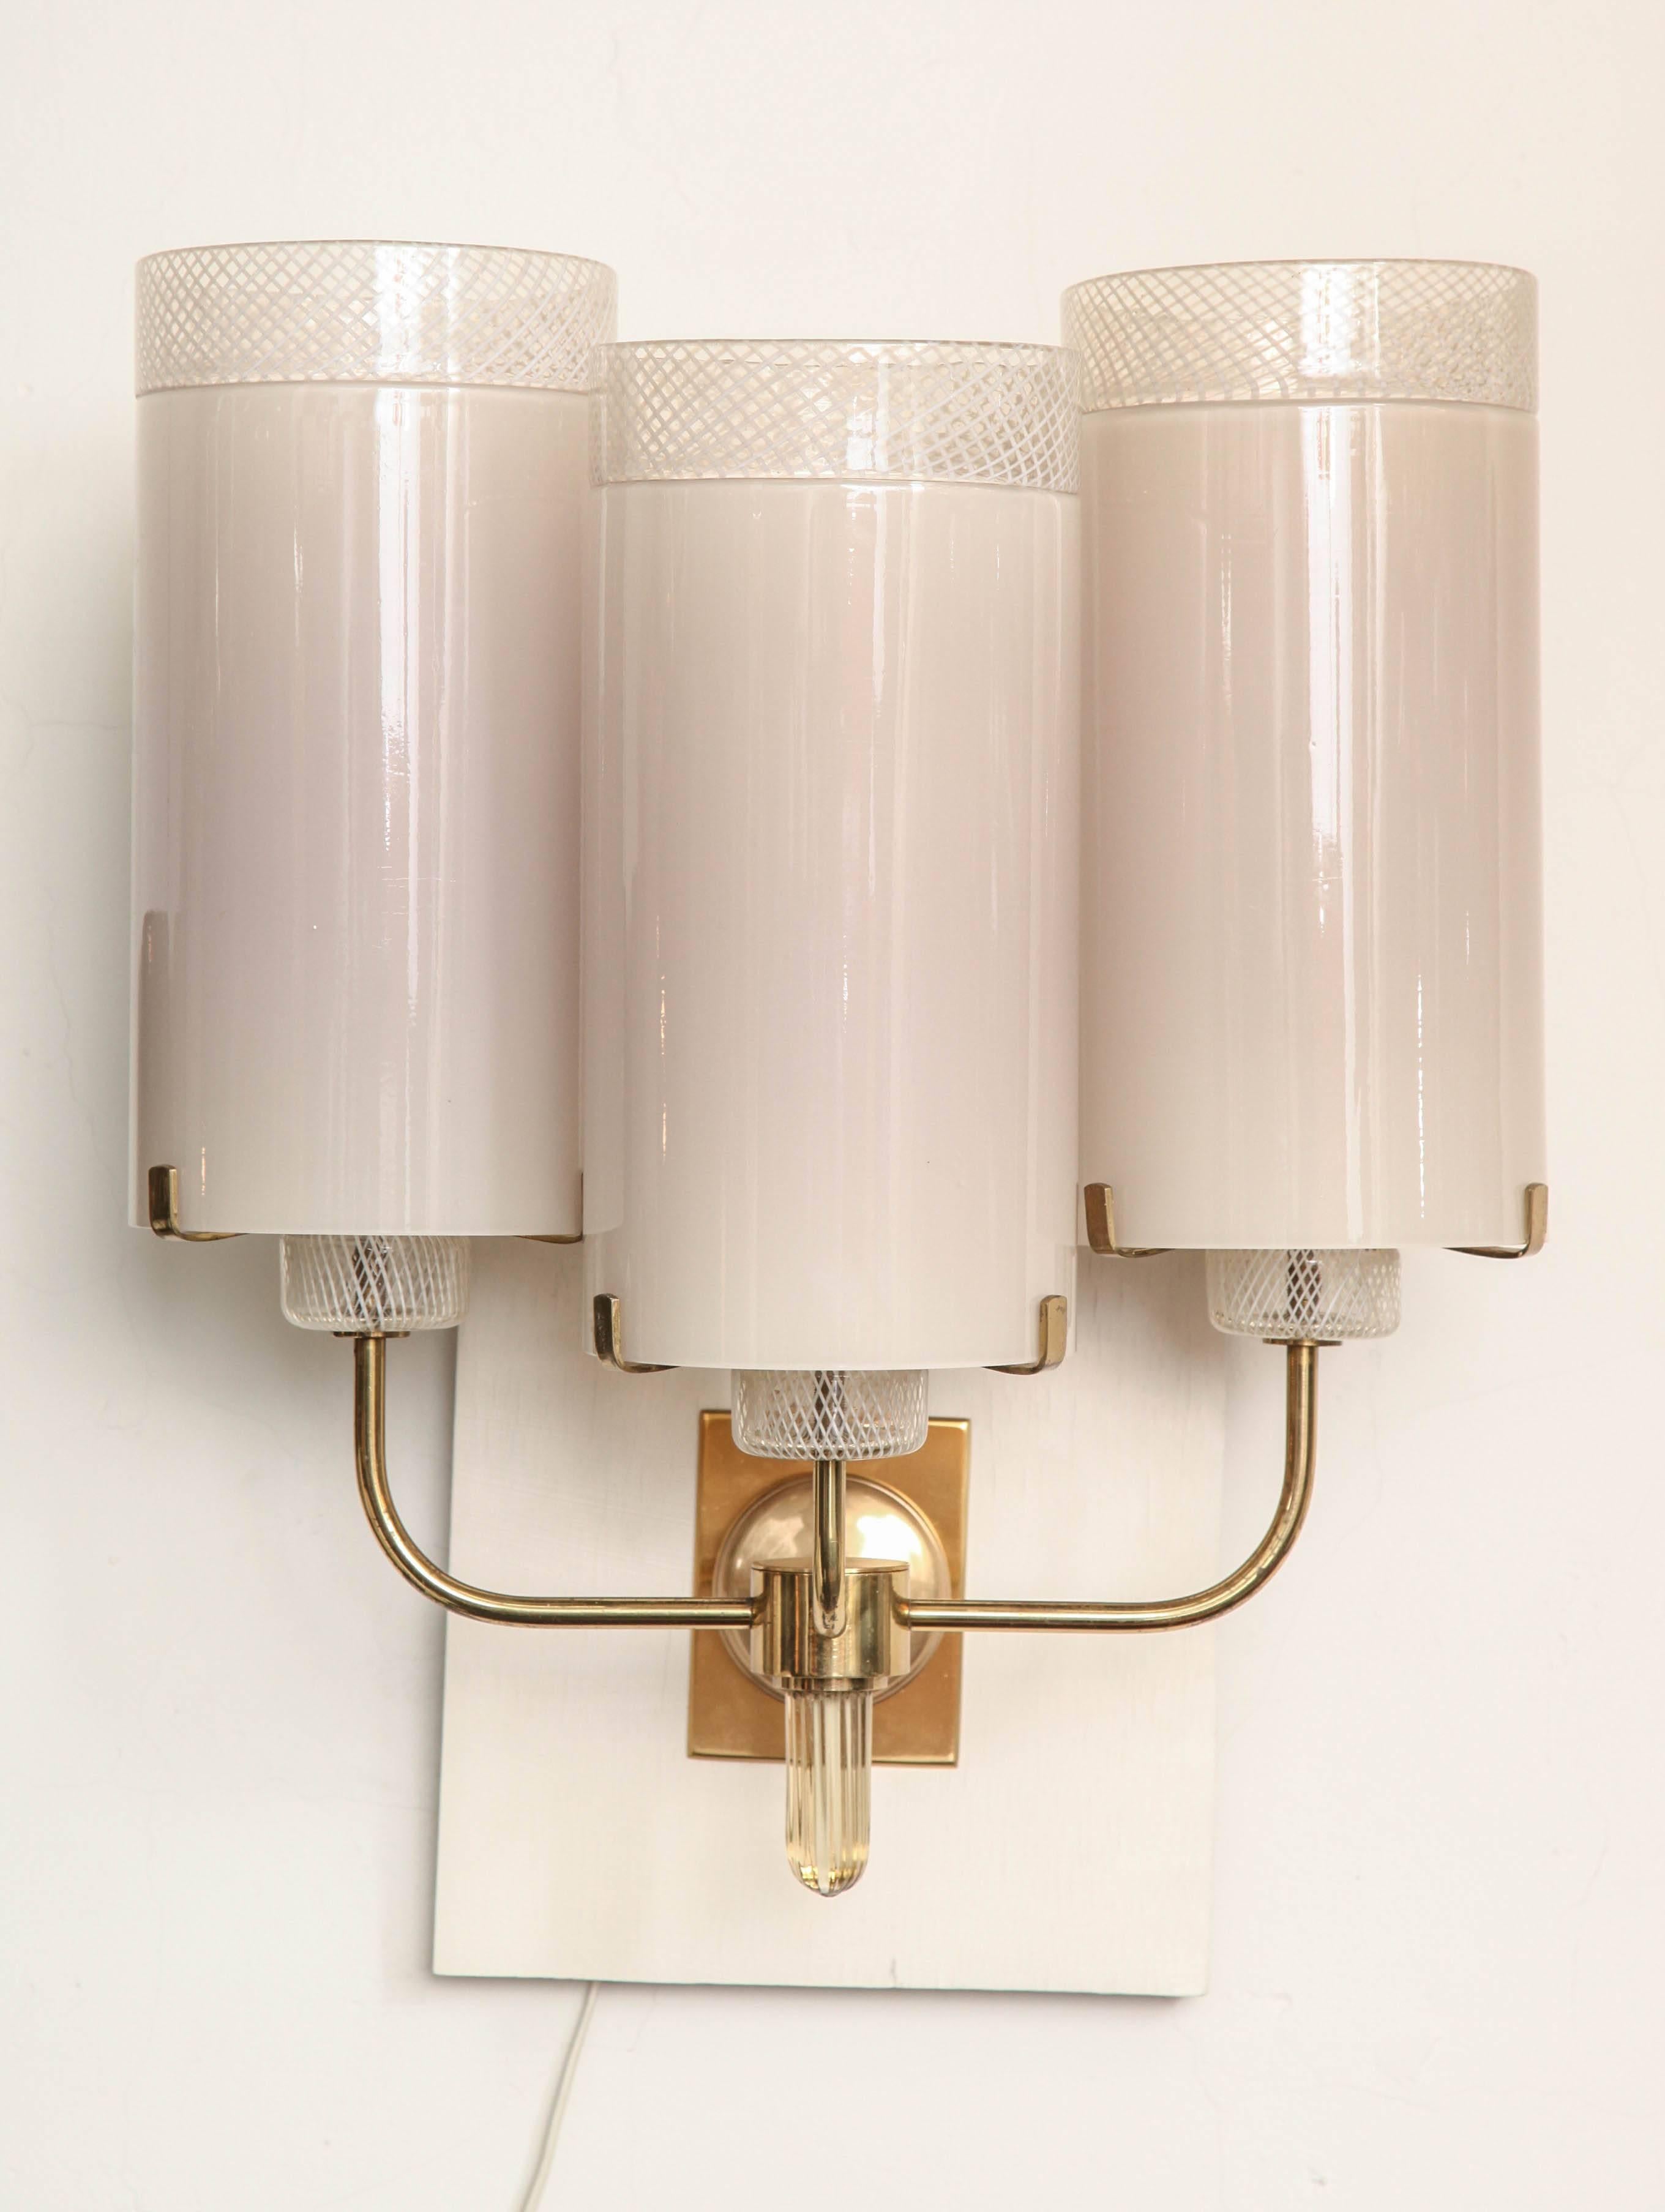 Mid-20th Century Sconces designed by Barovier Toso made in Italy For Sale